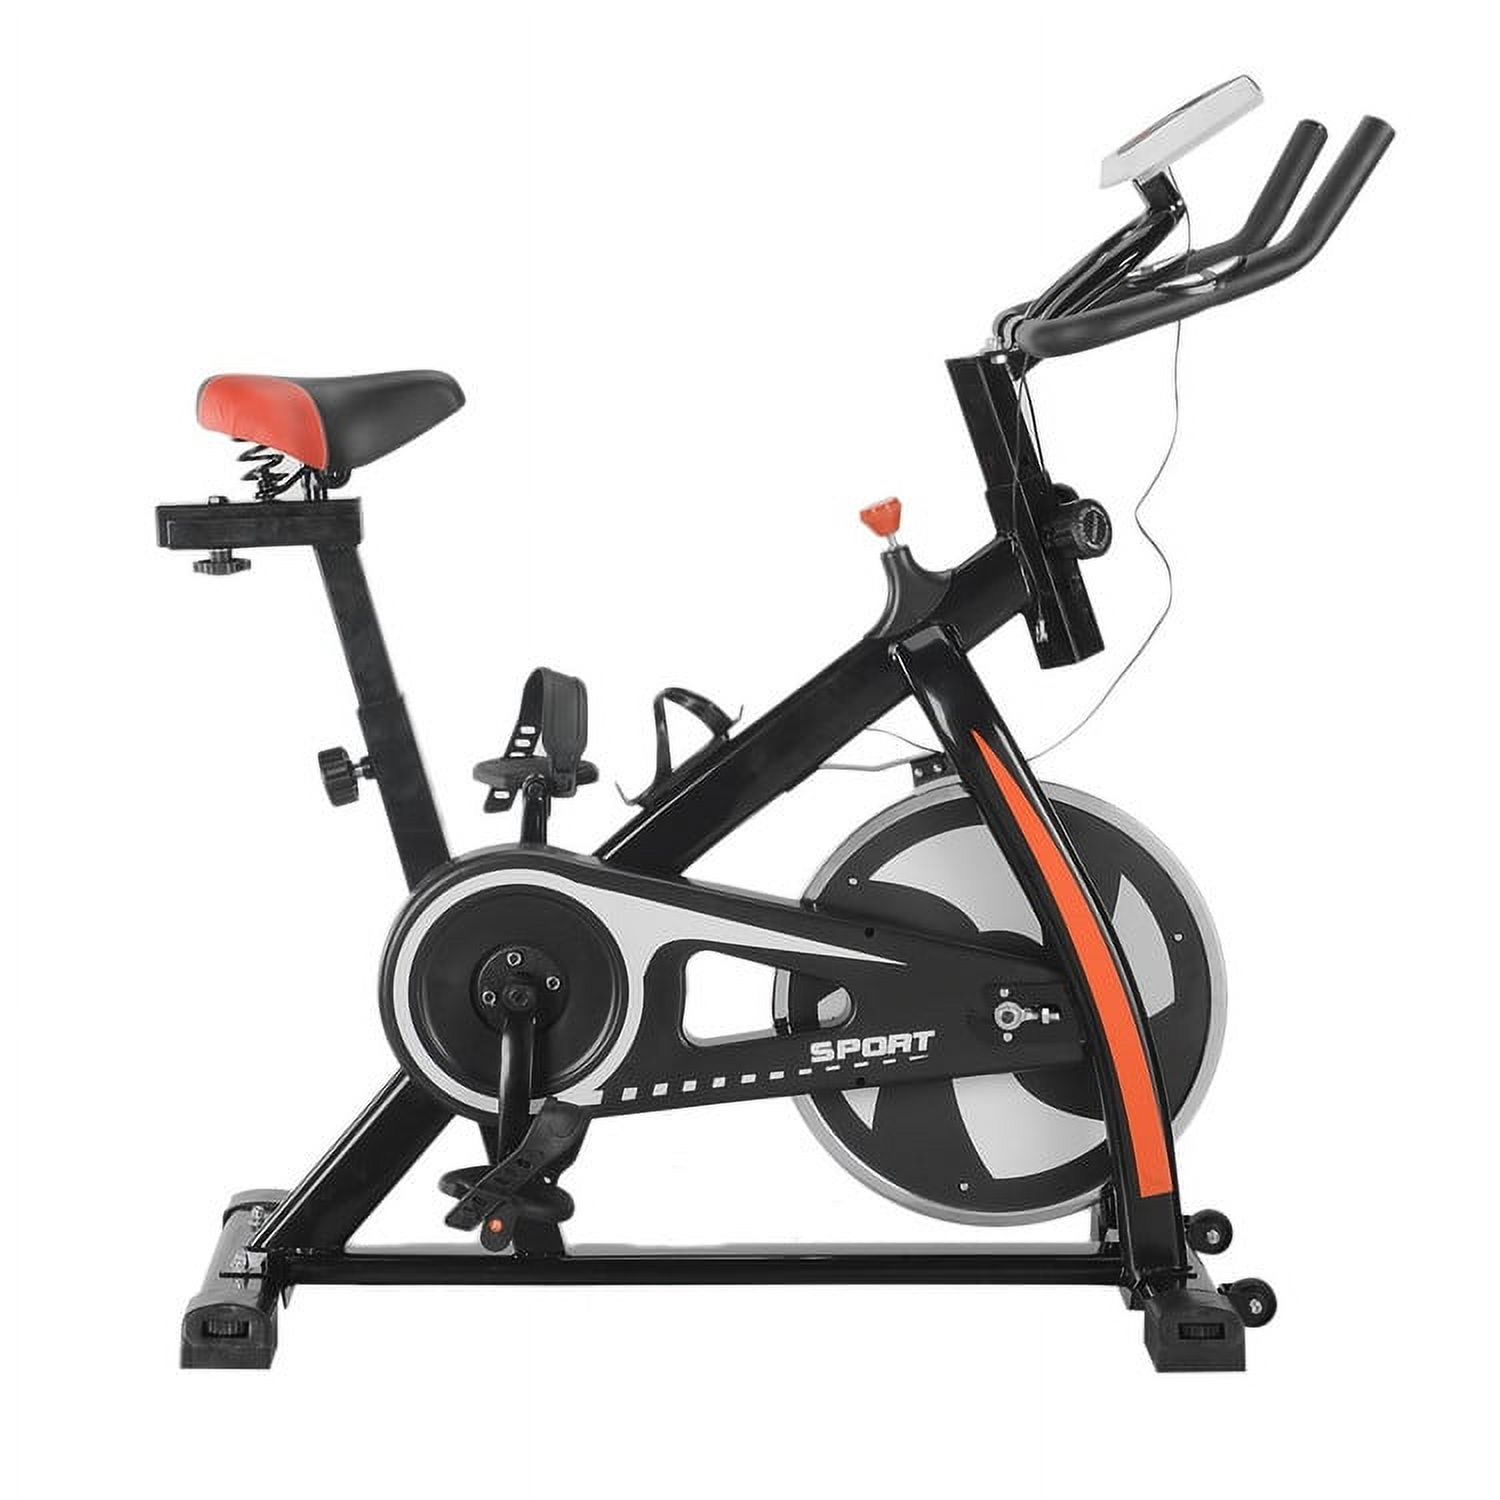 Indoor Cycling Trainer Exercise Bike Cycling Twisting Mini Exercise Bike Equipment (Black) - image 1 of 4